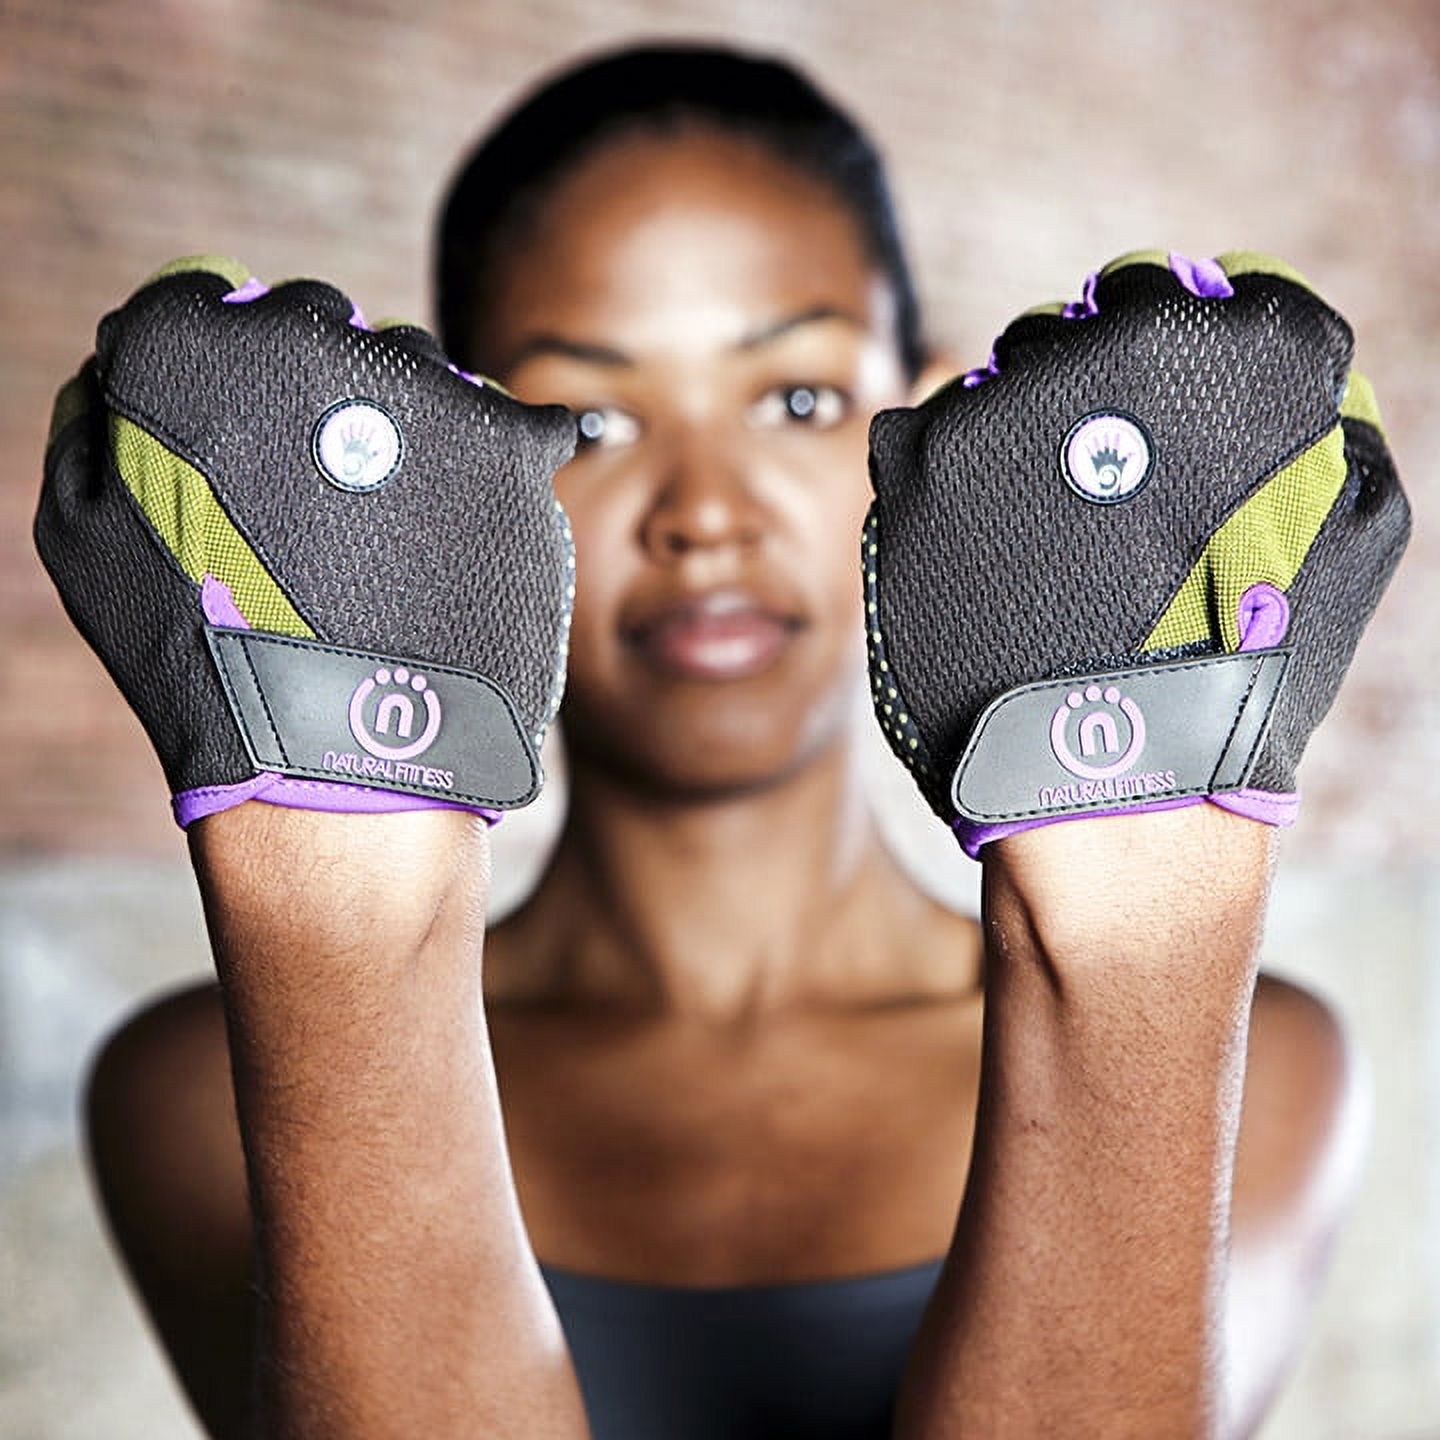 Natural Fitness Wrist Assist Gloves for Extra Support Needed During Yoga, Pilates, Weight-Training, and More ? Large - image 2 of 3